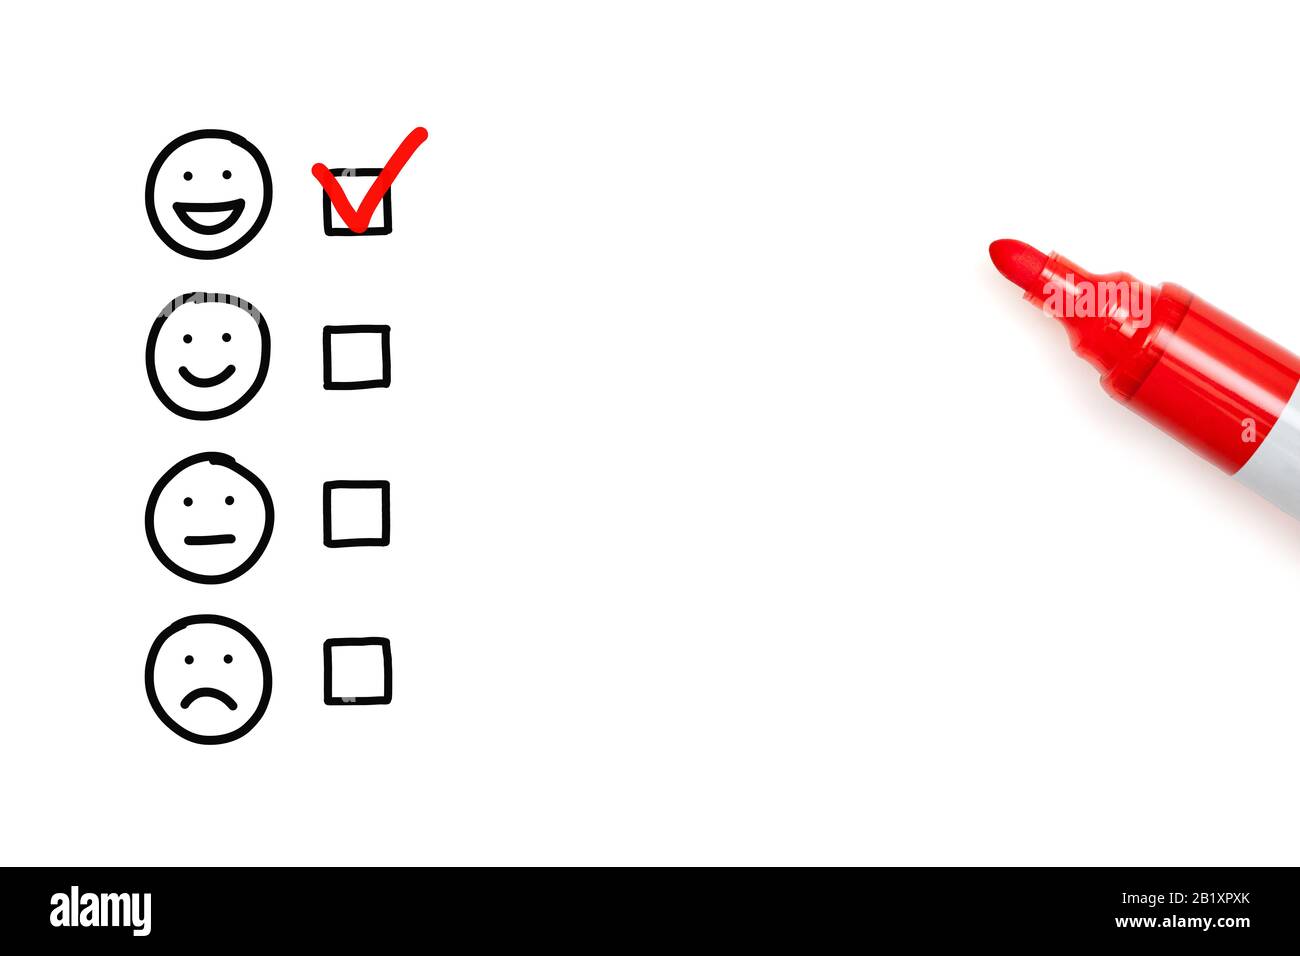 Red check mark on blank awesome survey checklist next to handdrawn happy face on white background. Stock Photo